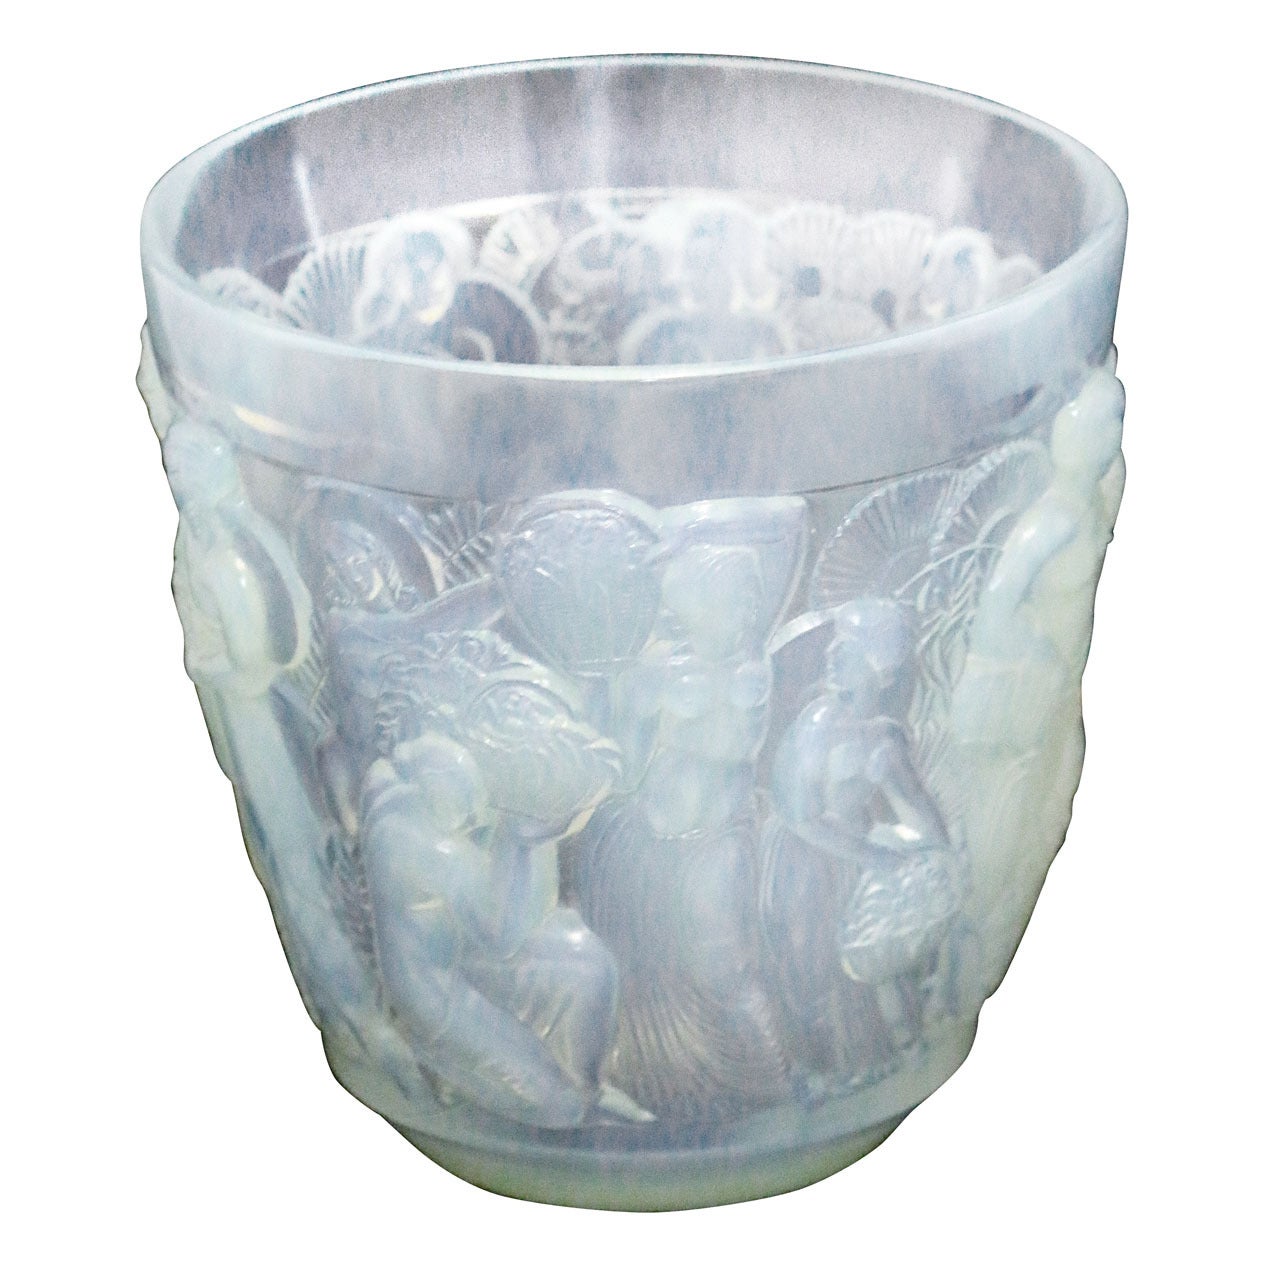 This is a vintage stunning Sabino Opalescent glass vase surrounded with goddesses in high relief in an Art Deco Design signed Sabino, France.
A fabulous addition to your collection or simply placed on a table.

Provenance assembled from the Edith